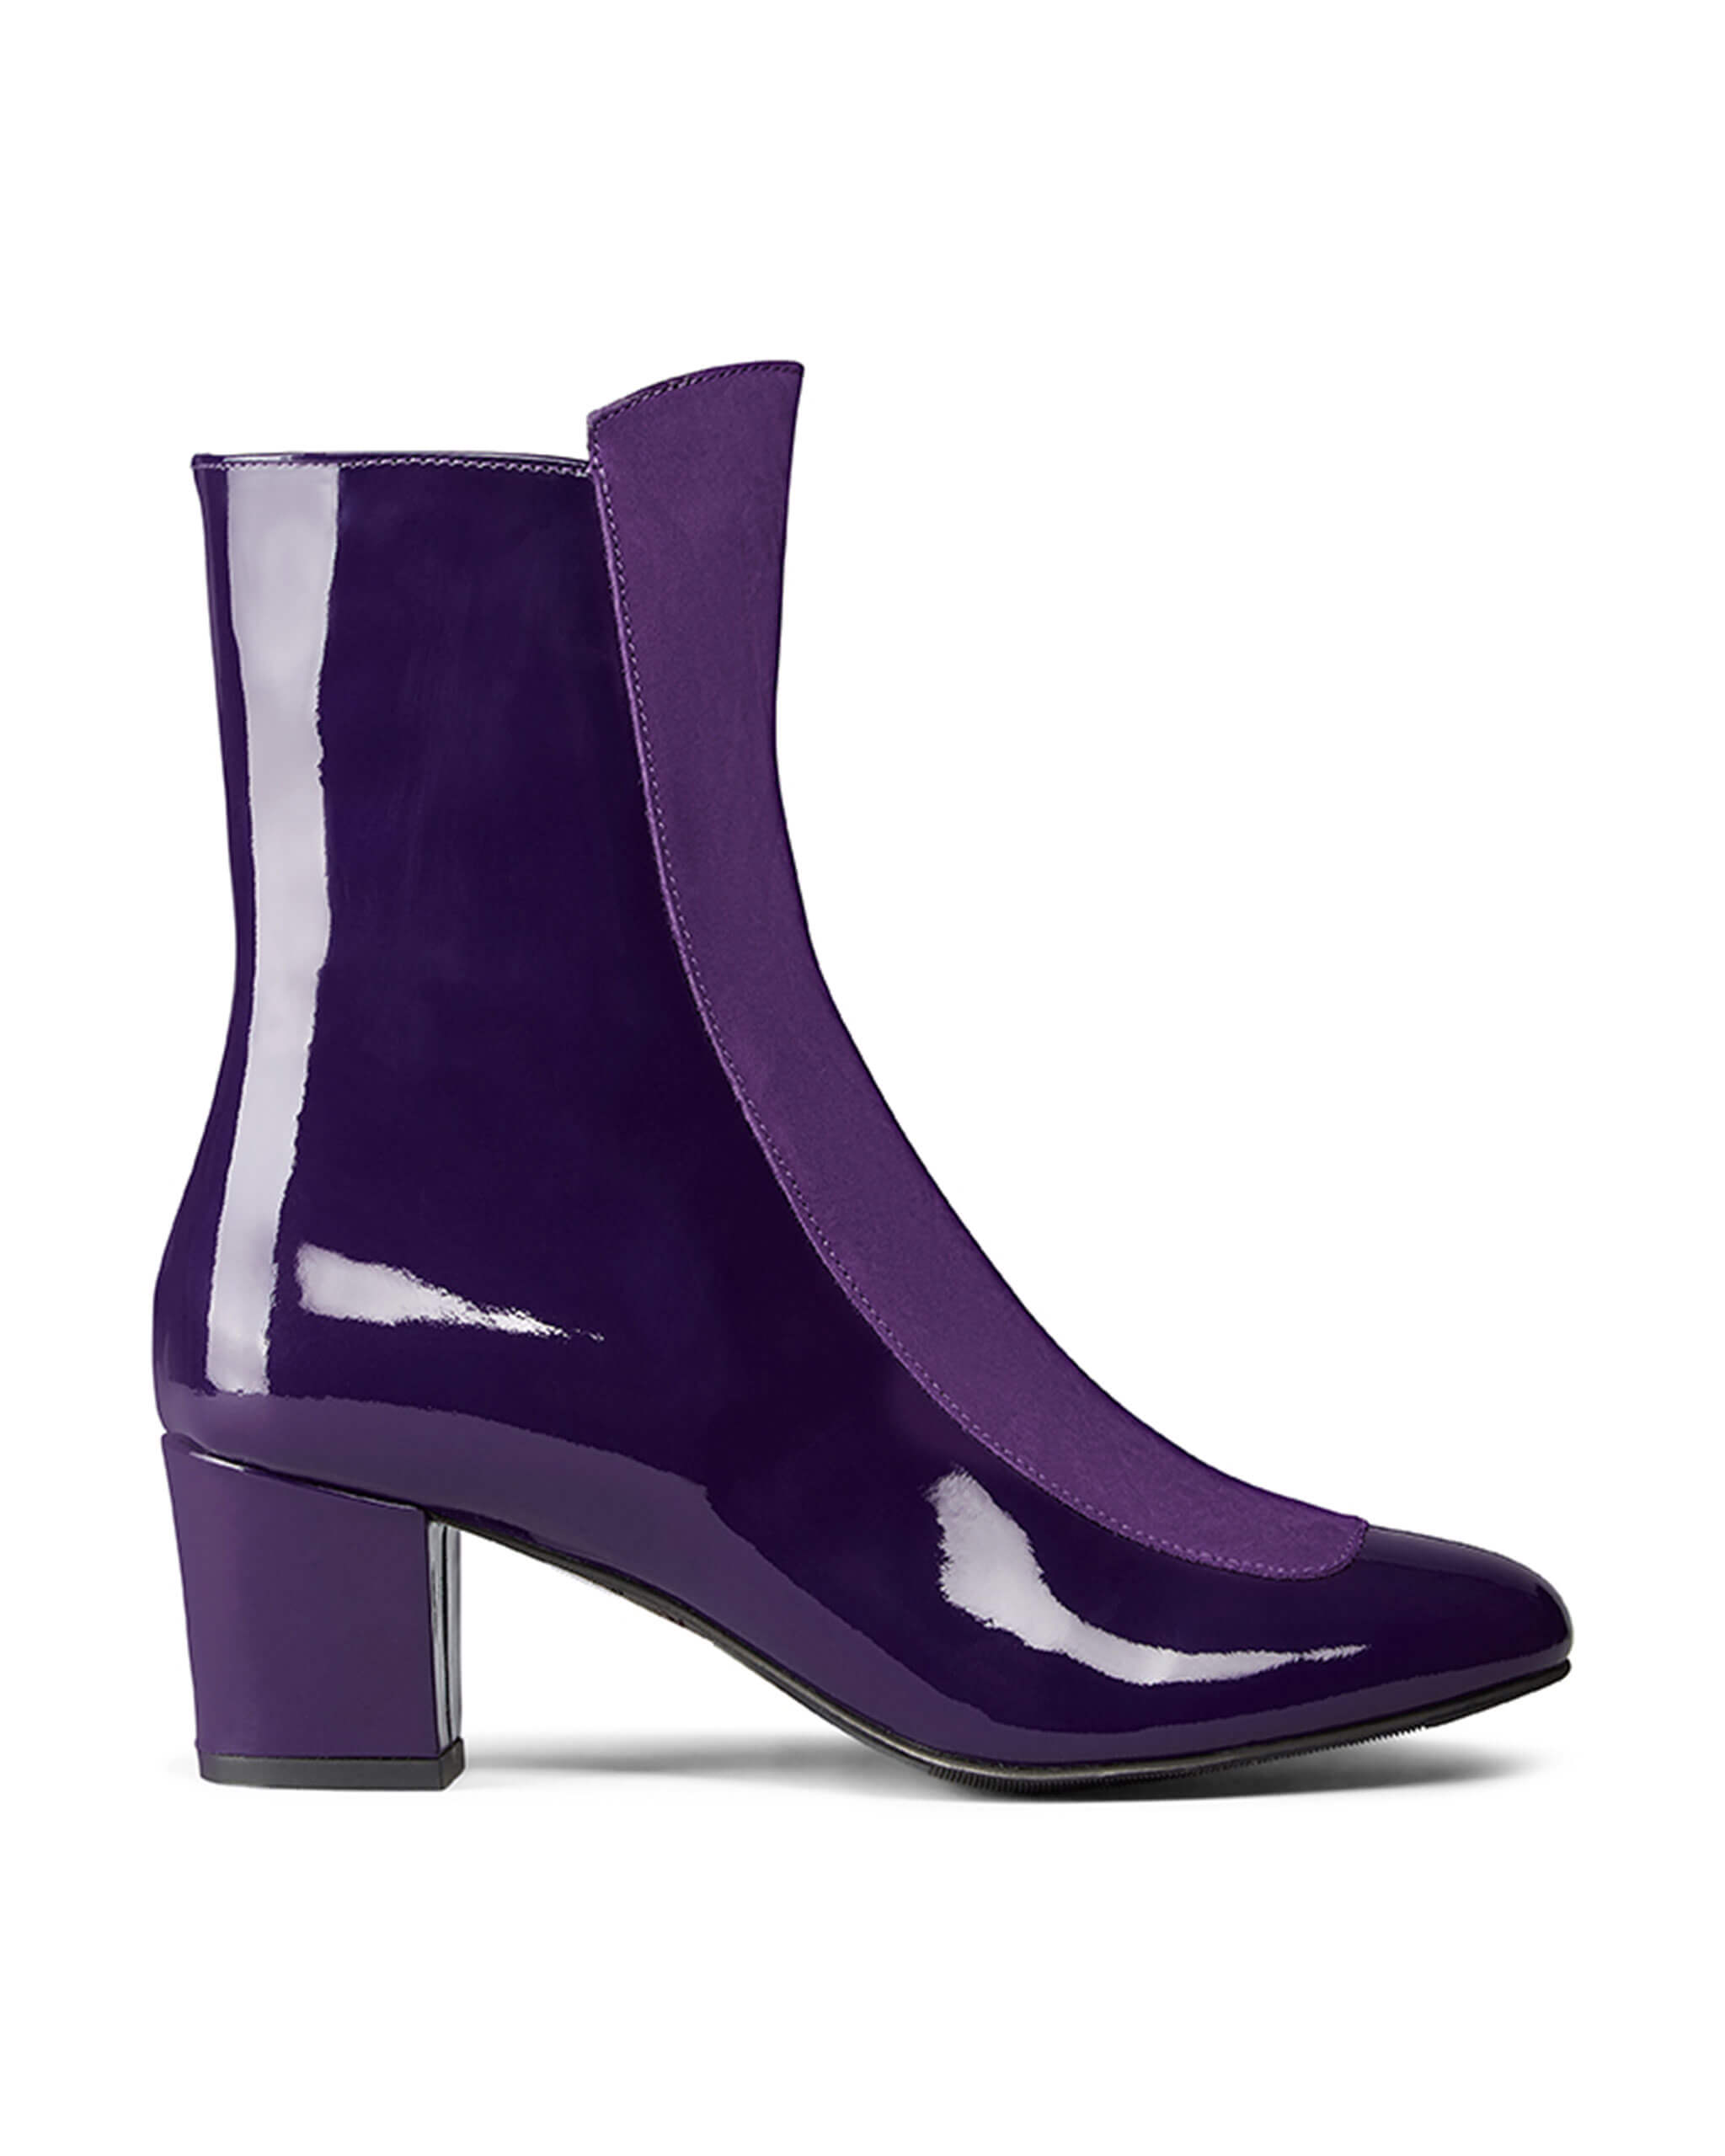 Ops&Ops No16 boot in Purple Duo, side view